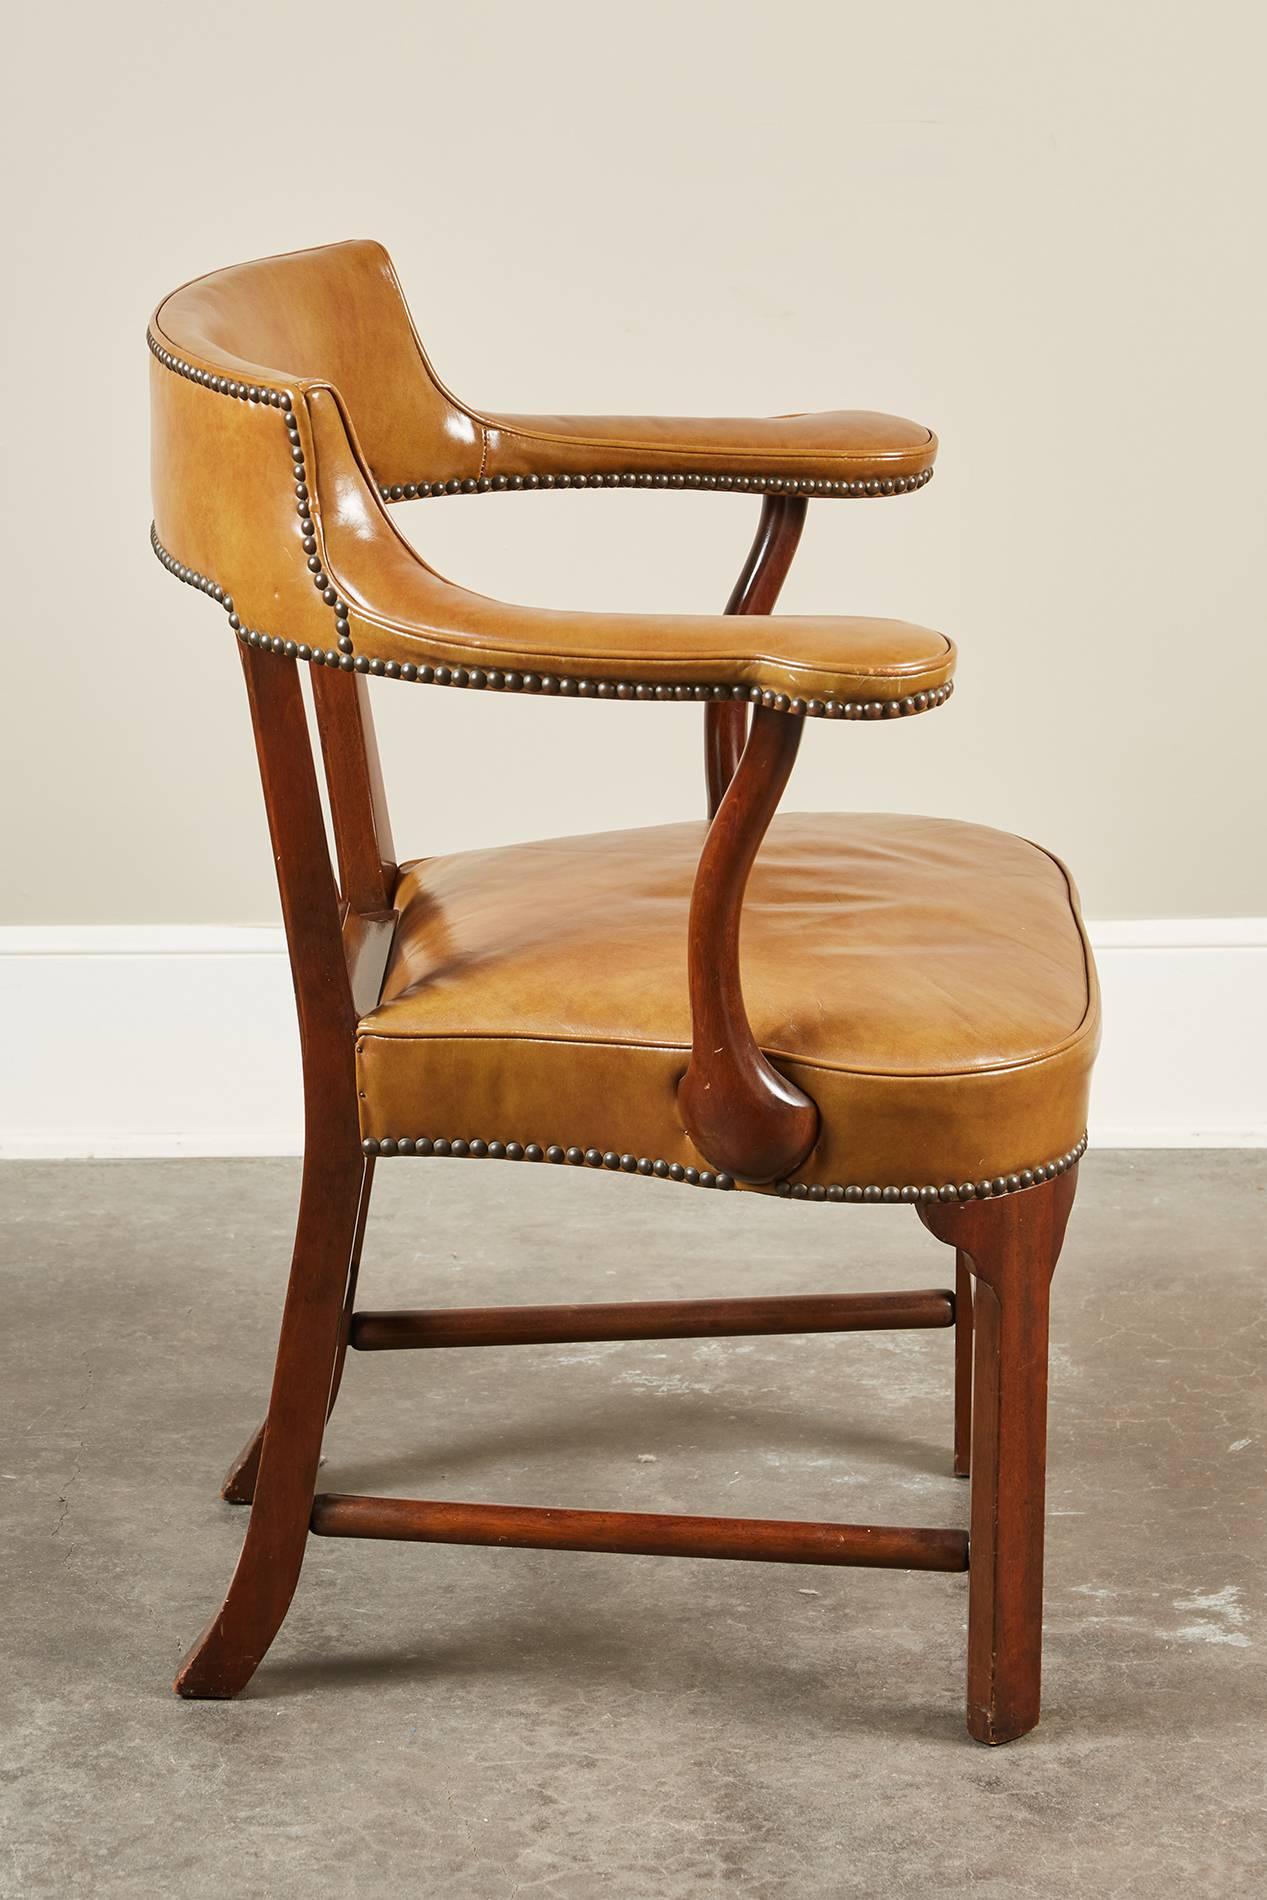 American Pair of Mid-20th Century Kittinger Mahogany and Leather Armchairs